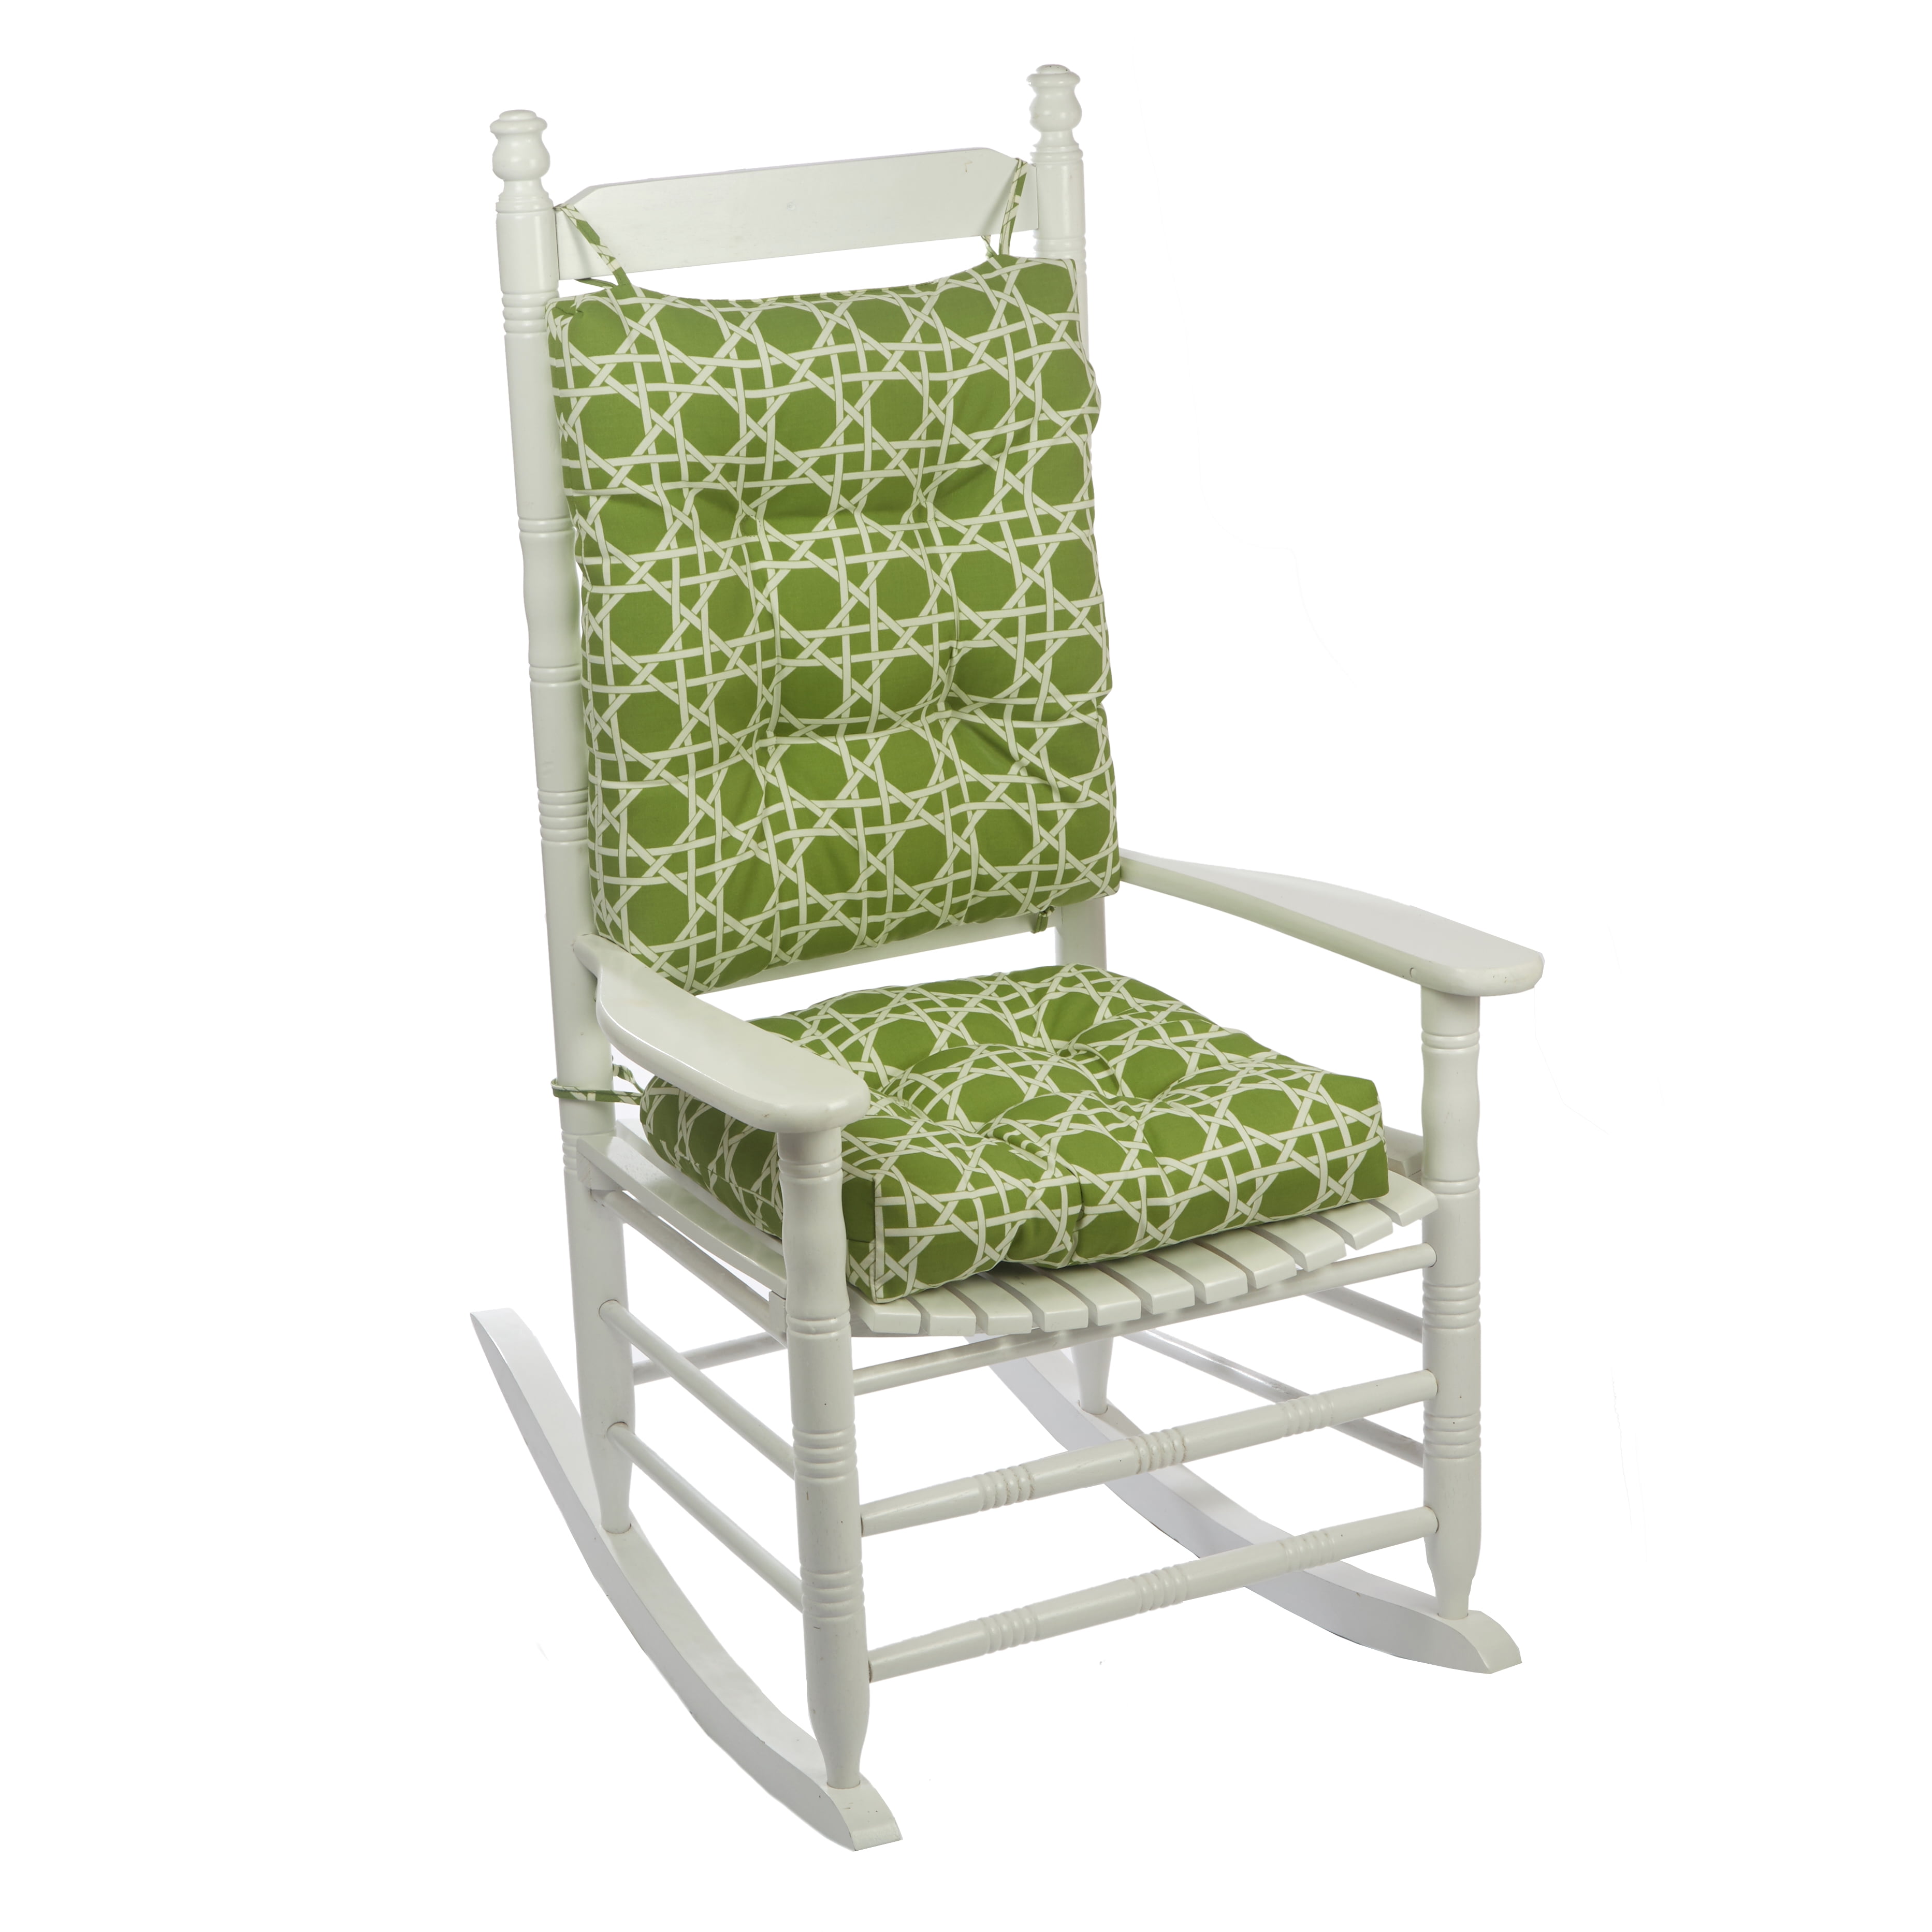 Kane Palm Rocking Chair Cushion Set, Outdoor Cushions For Porch Rocking Chairs